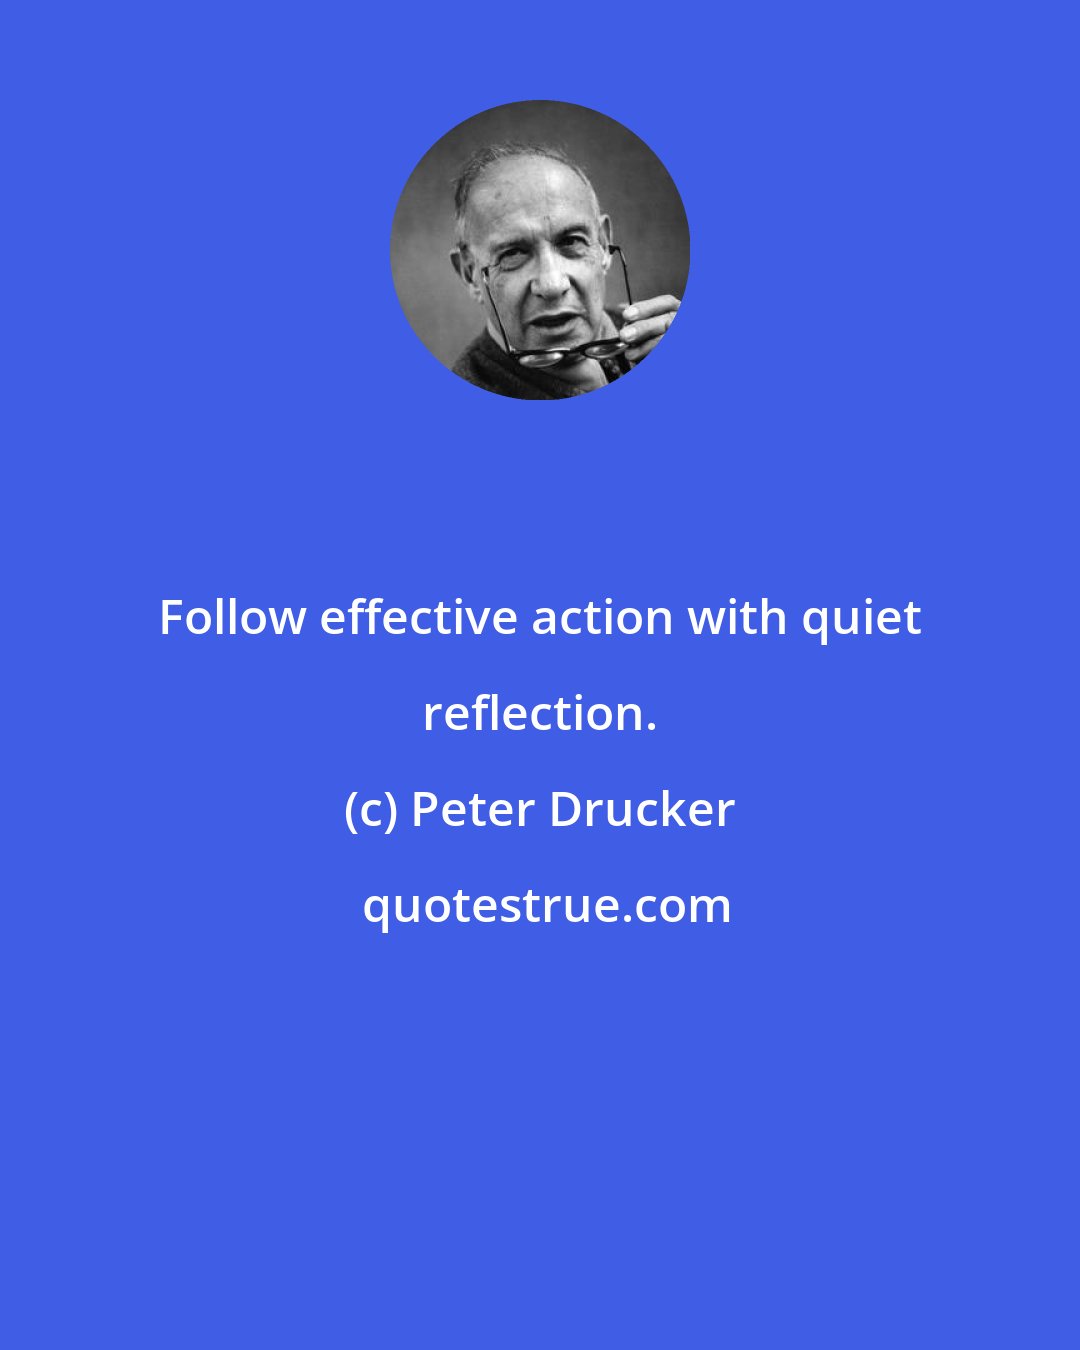 Peter Drucker: Follow effective action with quiet reflection.